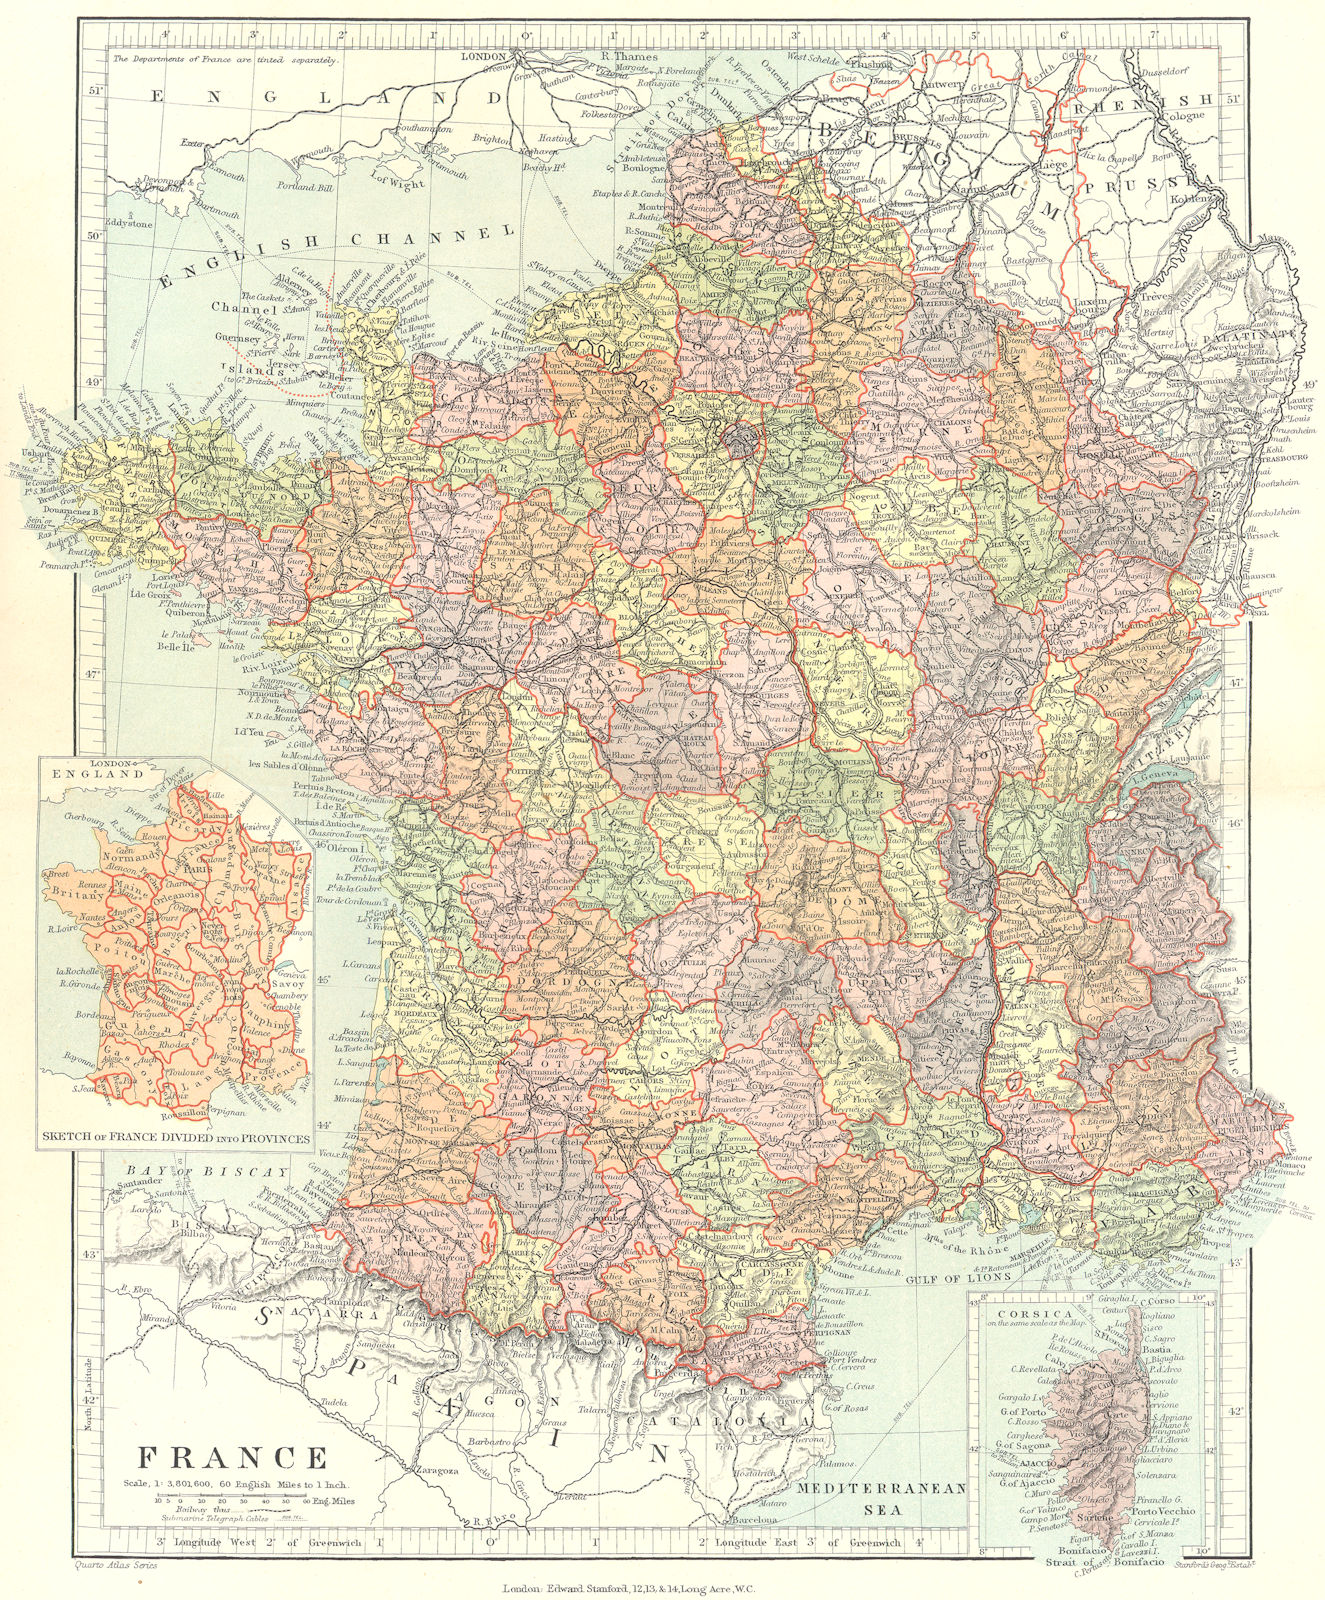 FRANCE. in departments, w/o Alsace Lorraine. Inset provinces. STANFORD 1906 map